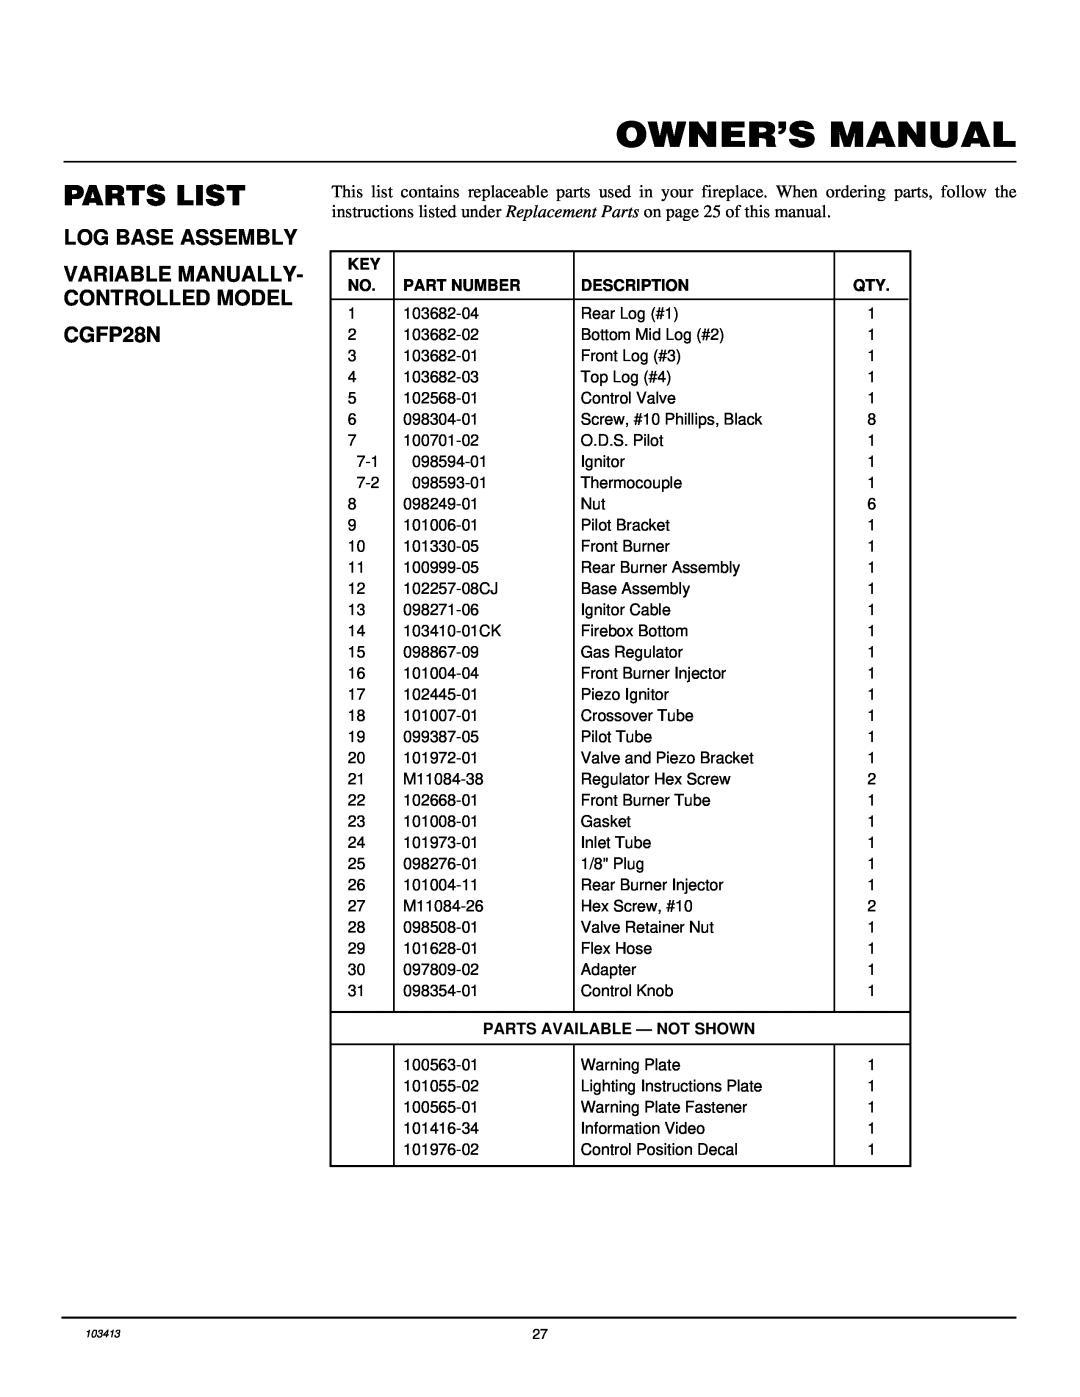 Desa CGFP28NT Parts List, Log Base Assembly, VARIABLE MANUALLY- CONTROLLED MODEL CGFP28N, Part Number, Description 